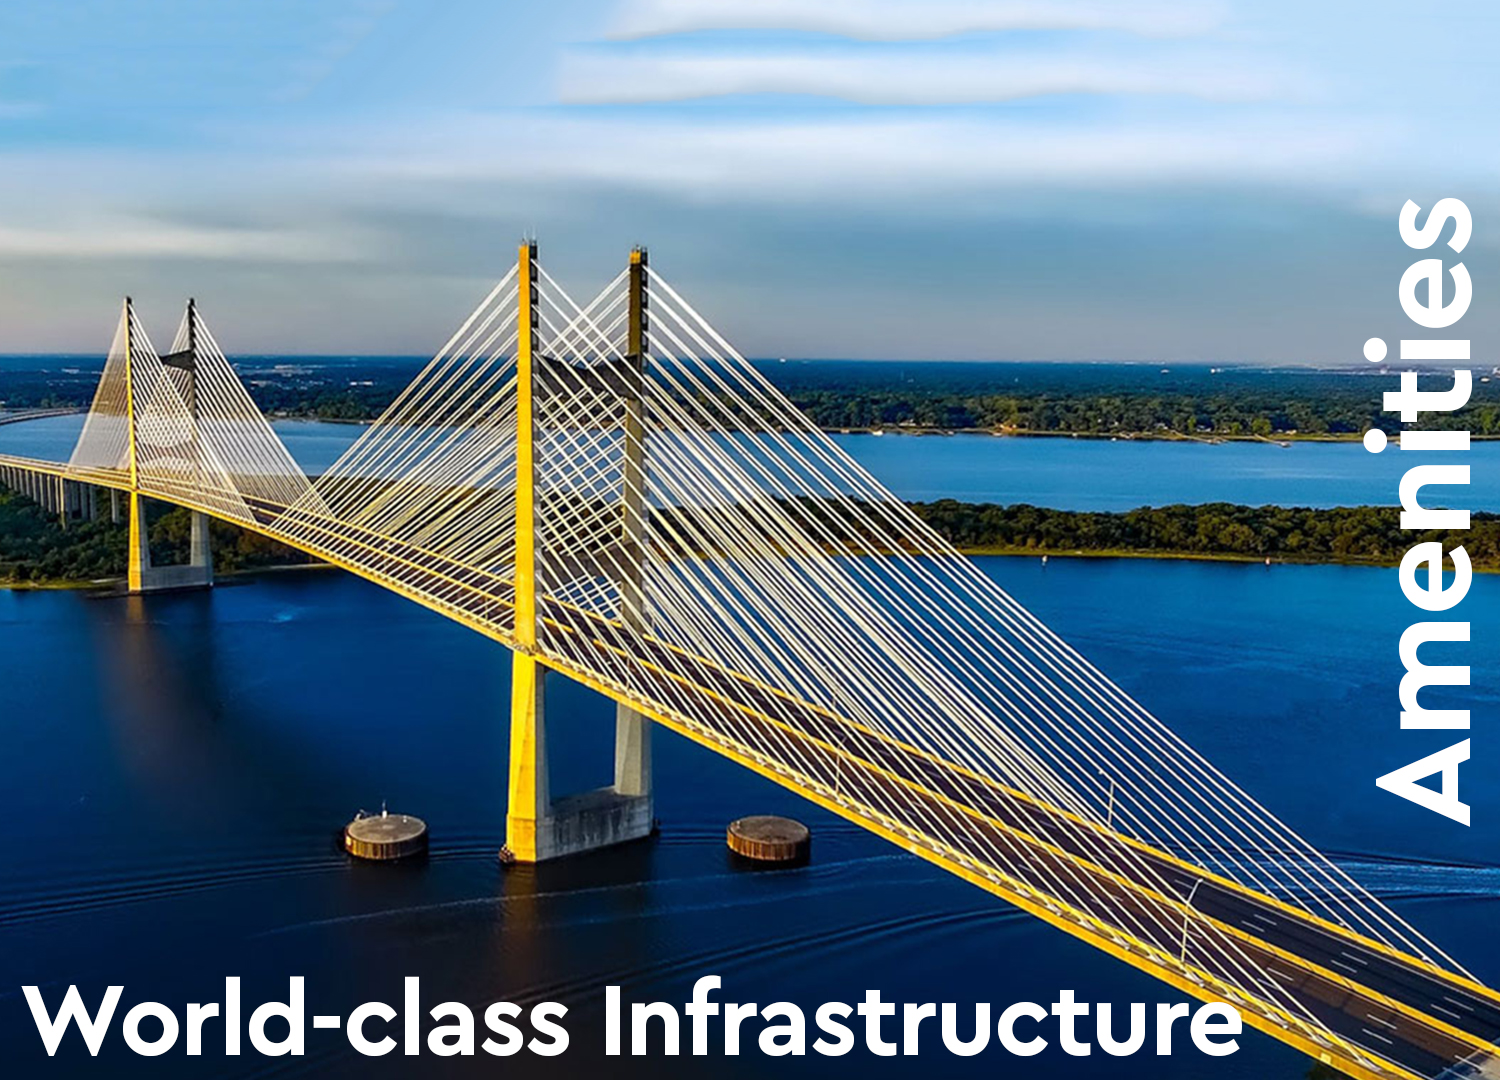 New City Paradise World-class Infrastructure